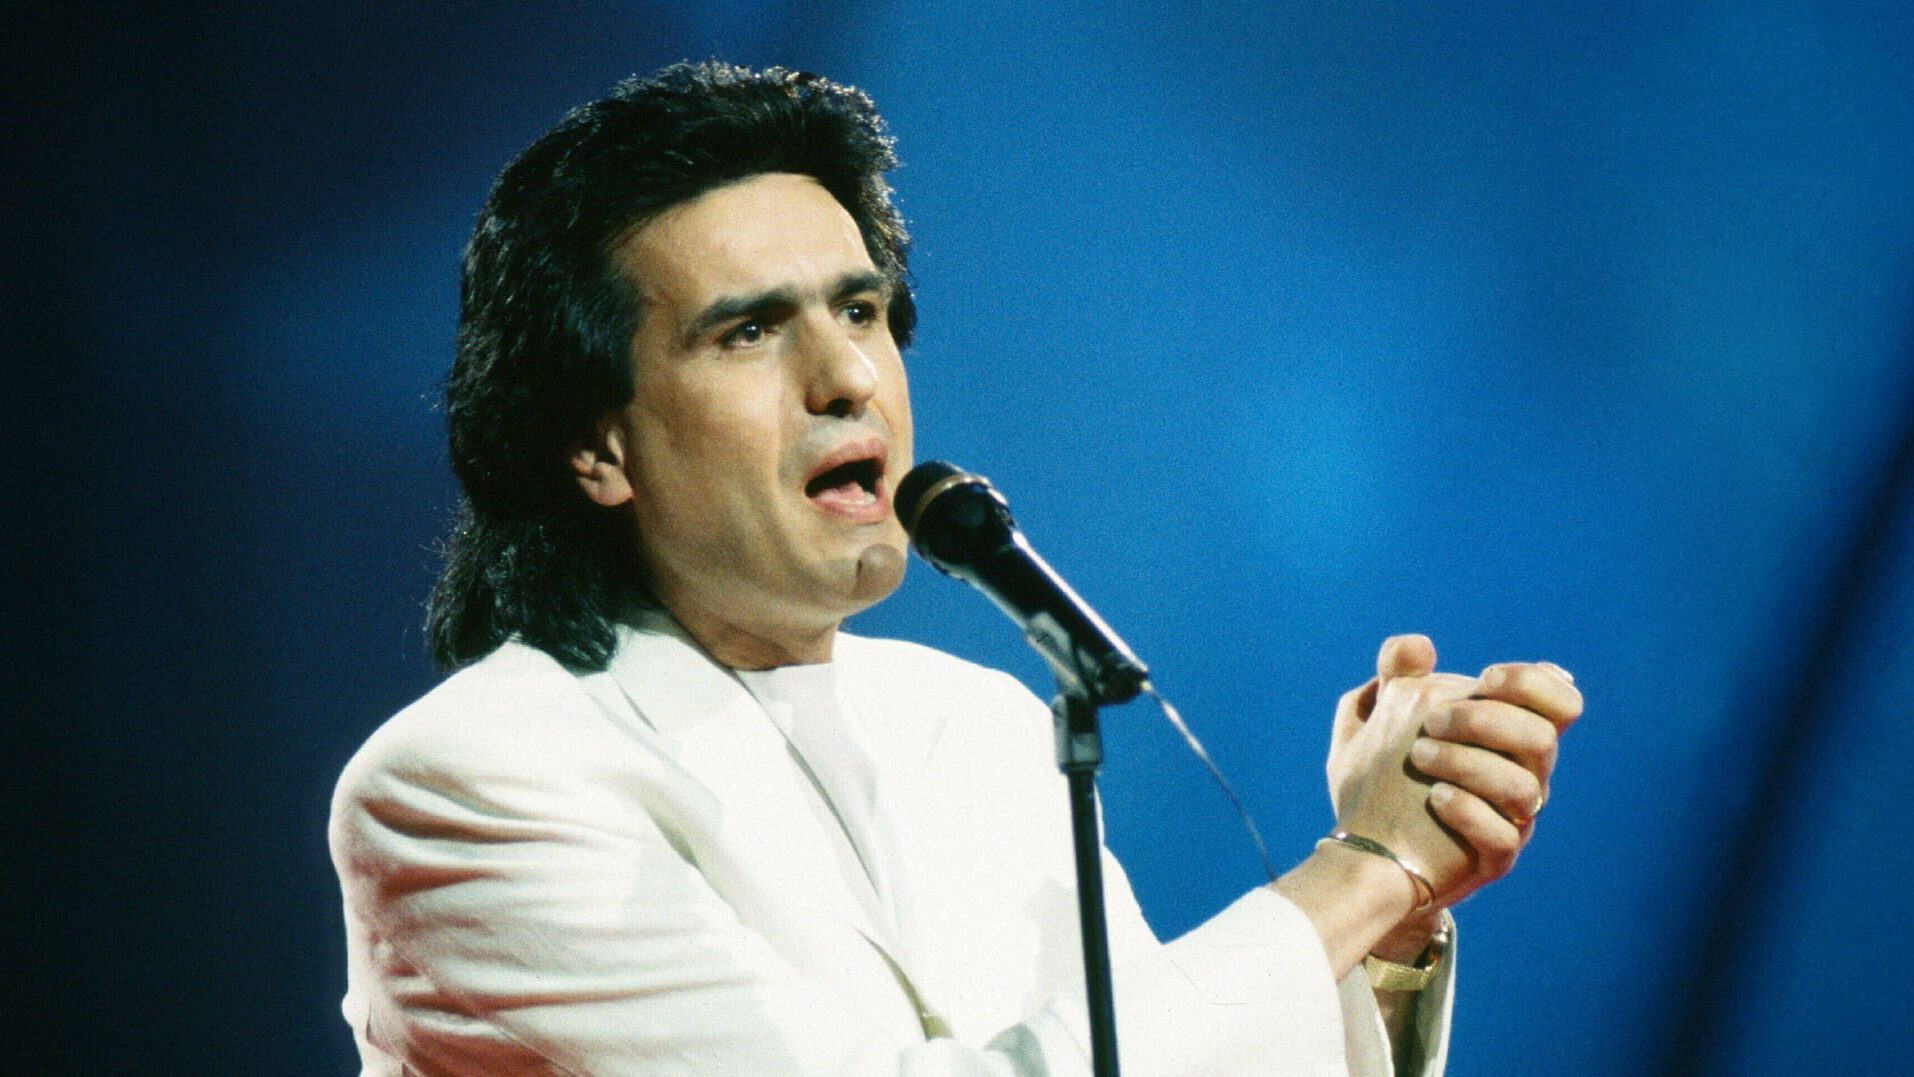 Toto Cutugno at the Eurovision Song Contest 1990 in Zagreb, then Yugoslavia - photo by Eurovision.tv